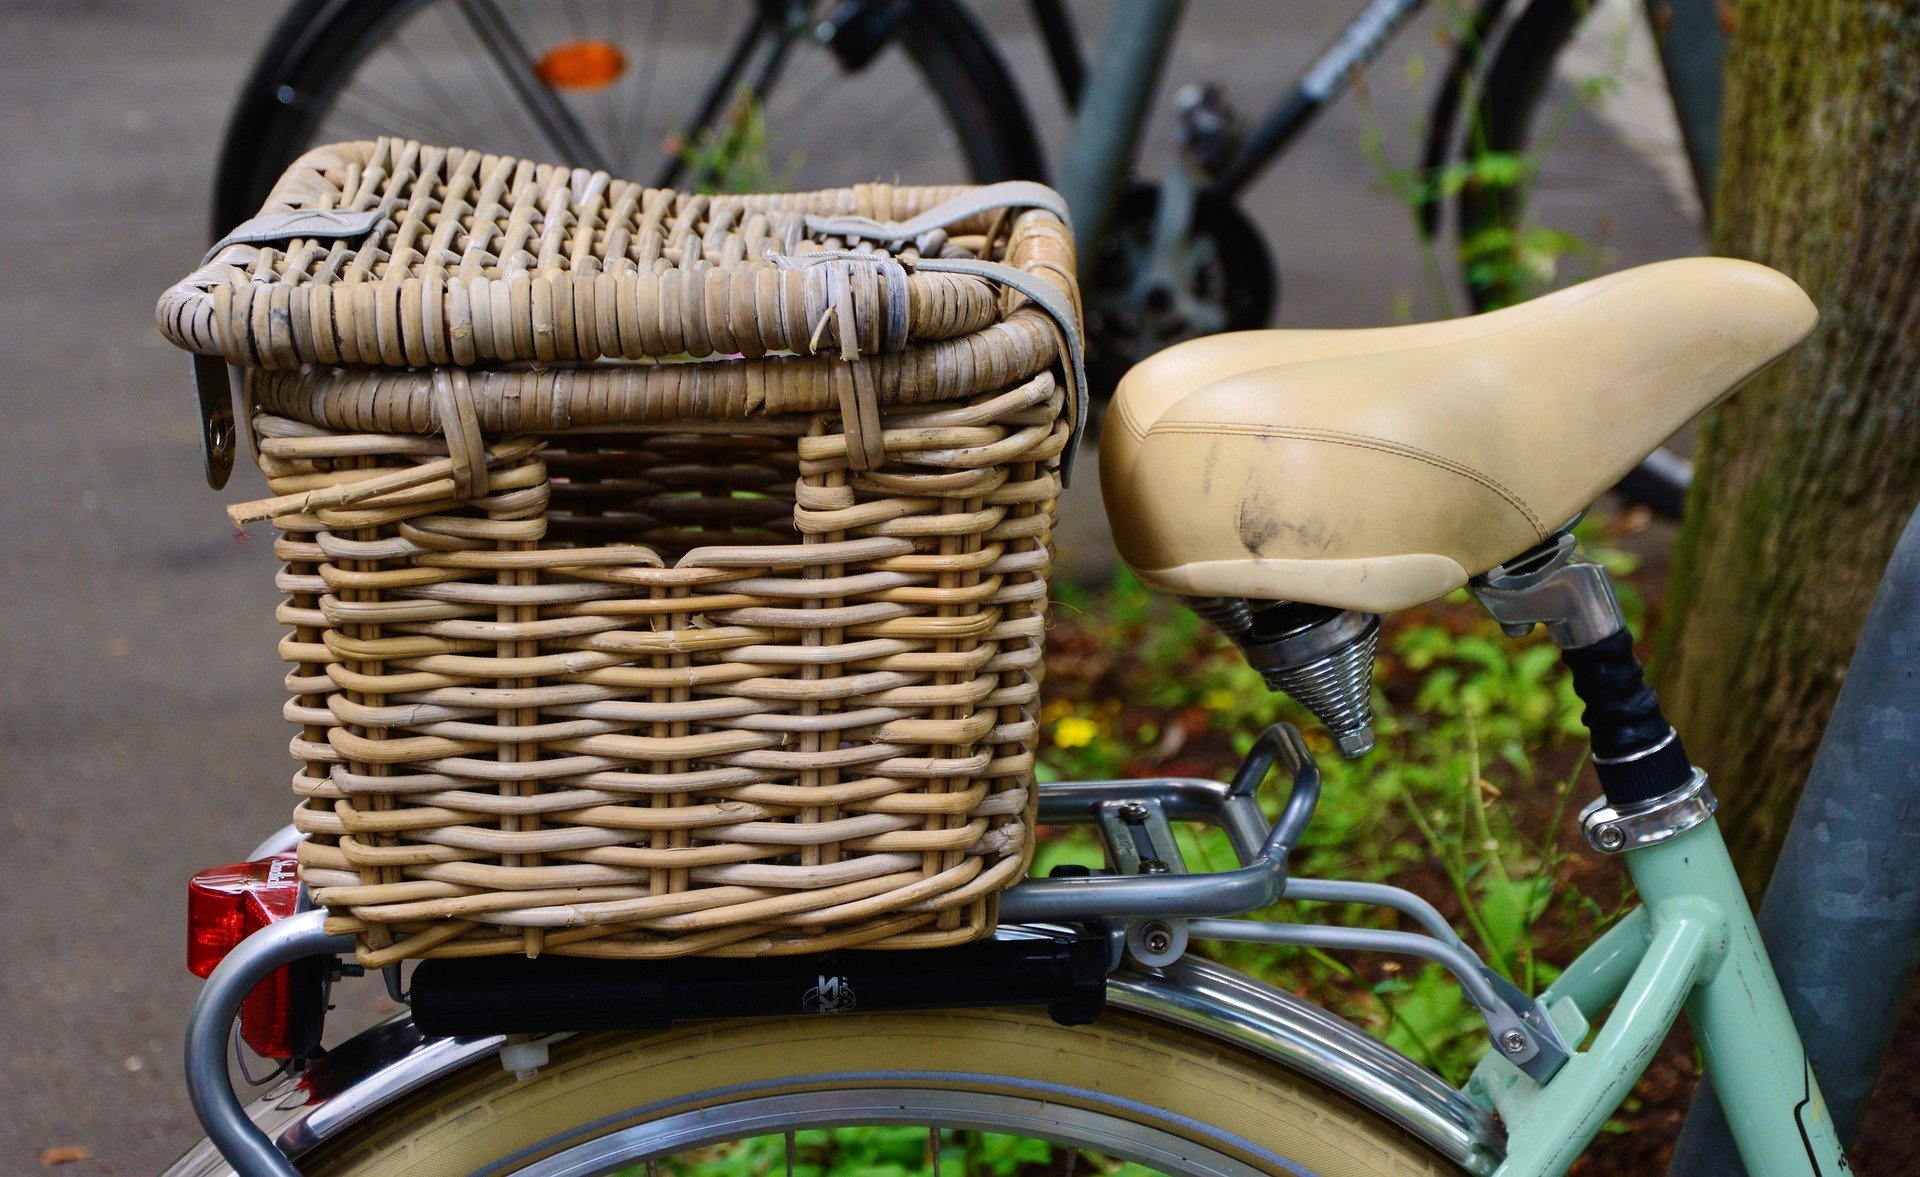 A bicycle with a basket attached | Photo: Pixabay/congerdesign